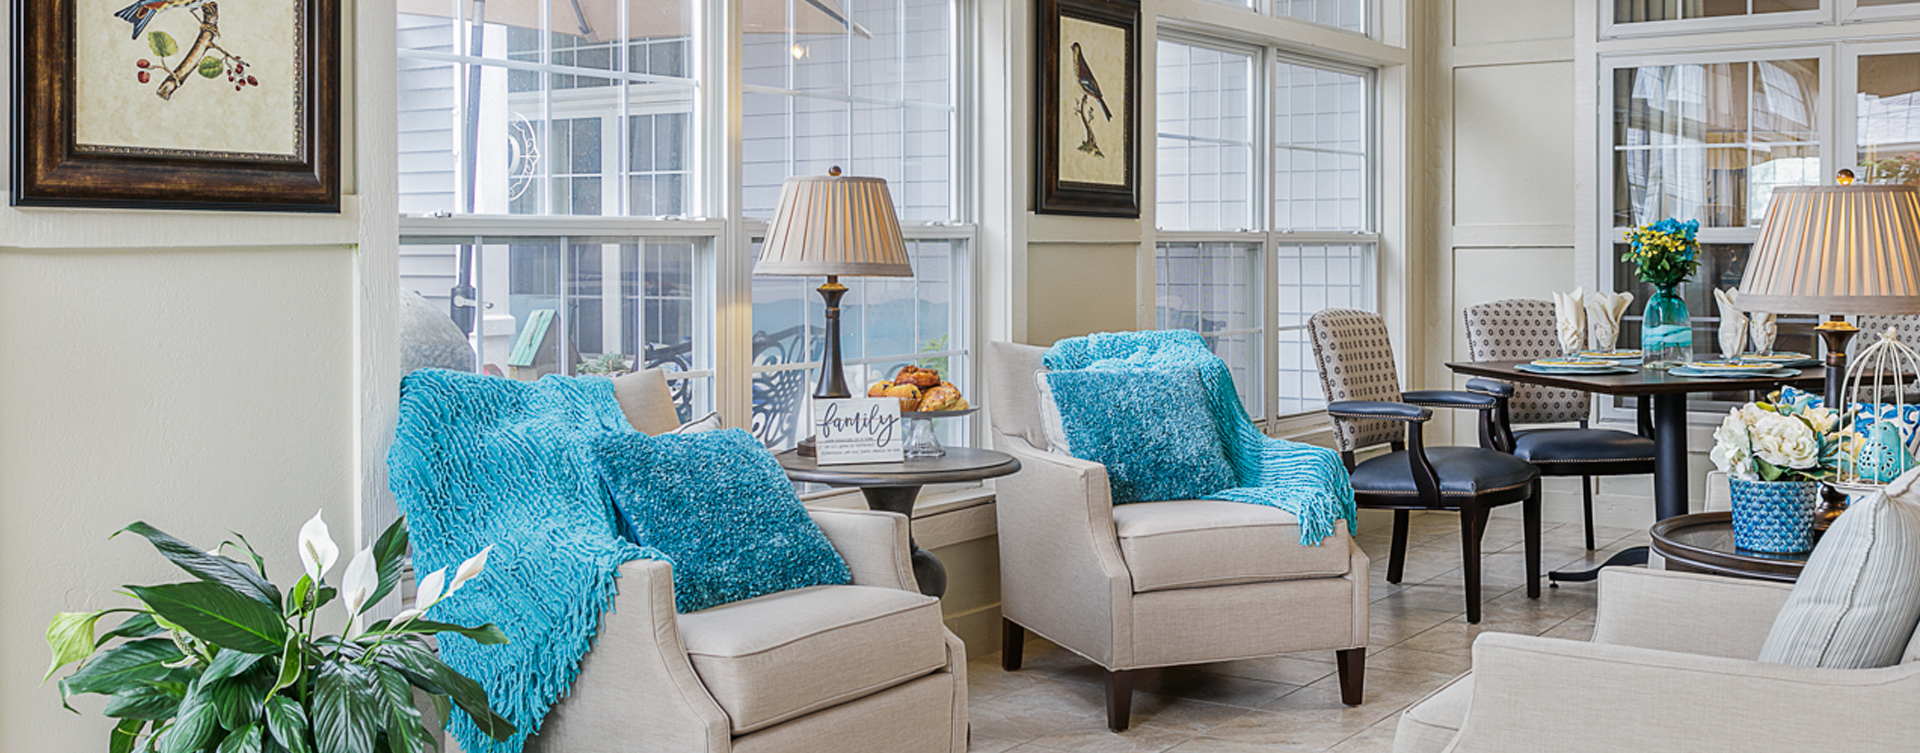 Enjoy the view of the outdoors from the sunroom at Bickford of Omaha - Blondo